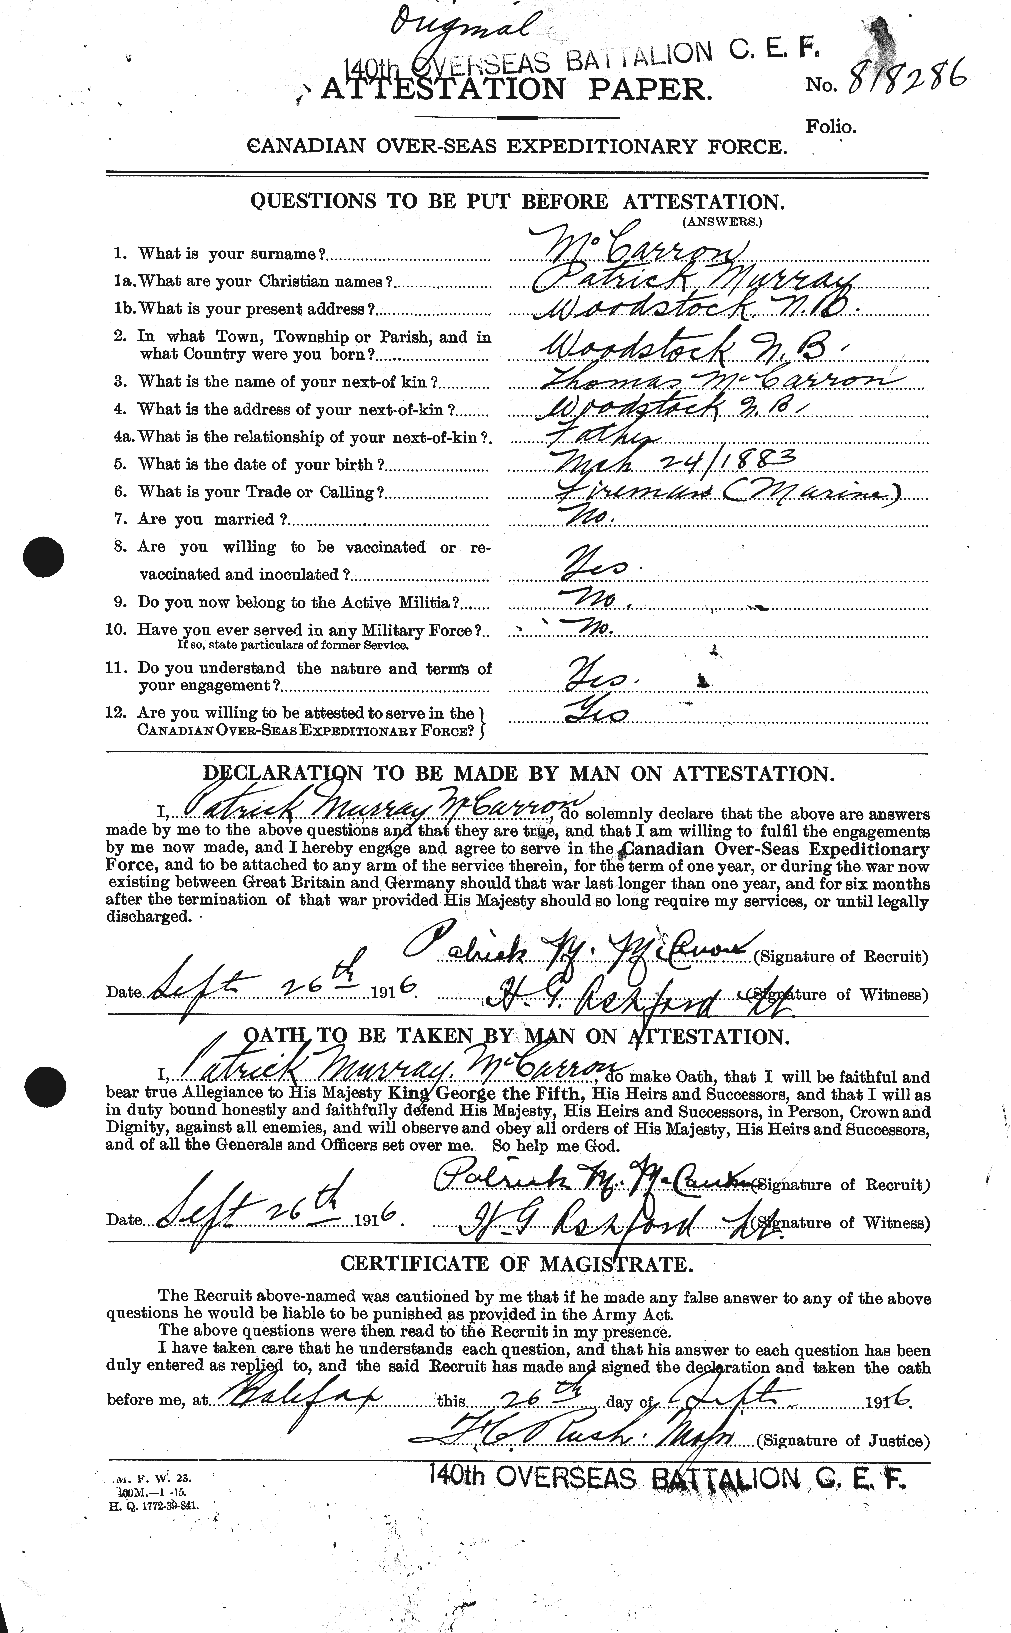 Personnel Records of the First World War - CEF 132448a